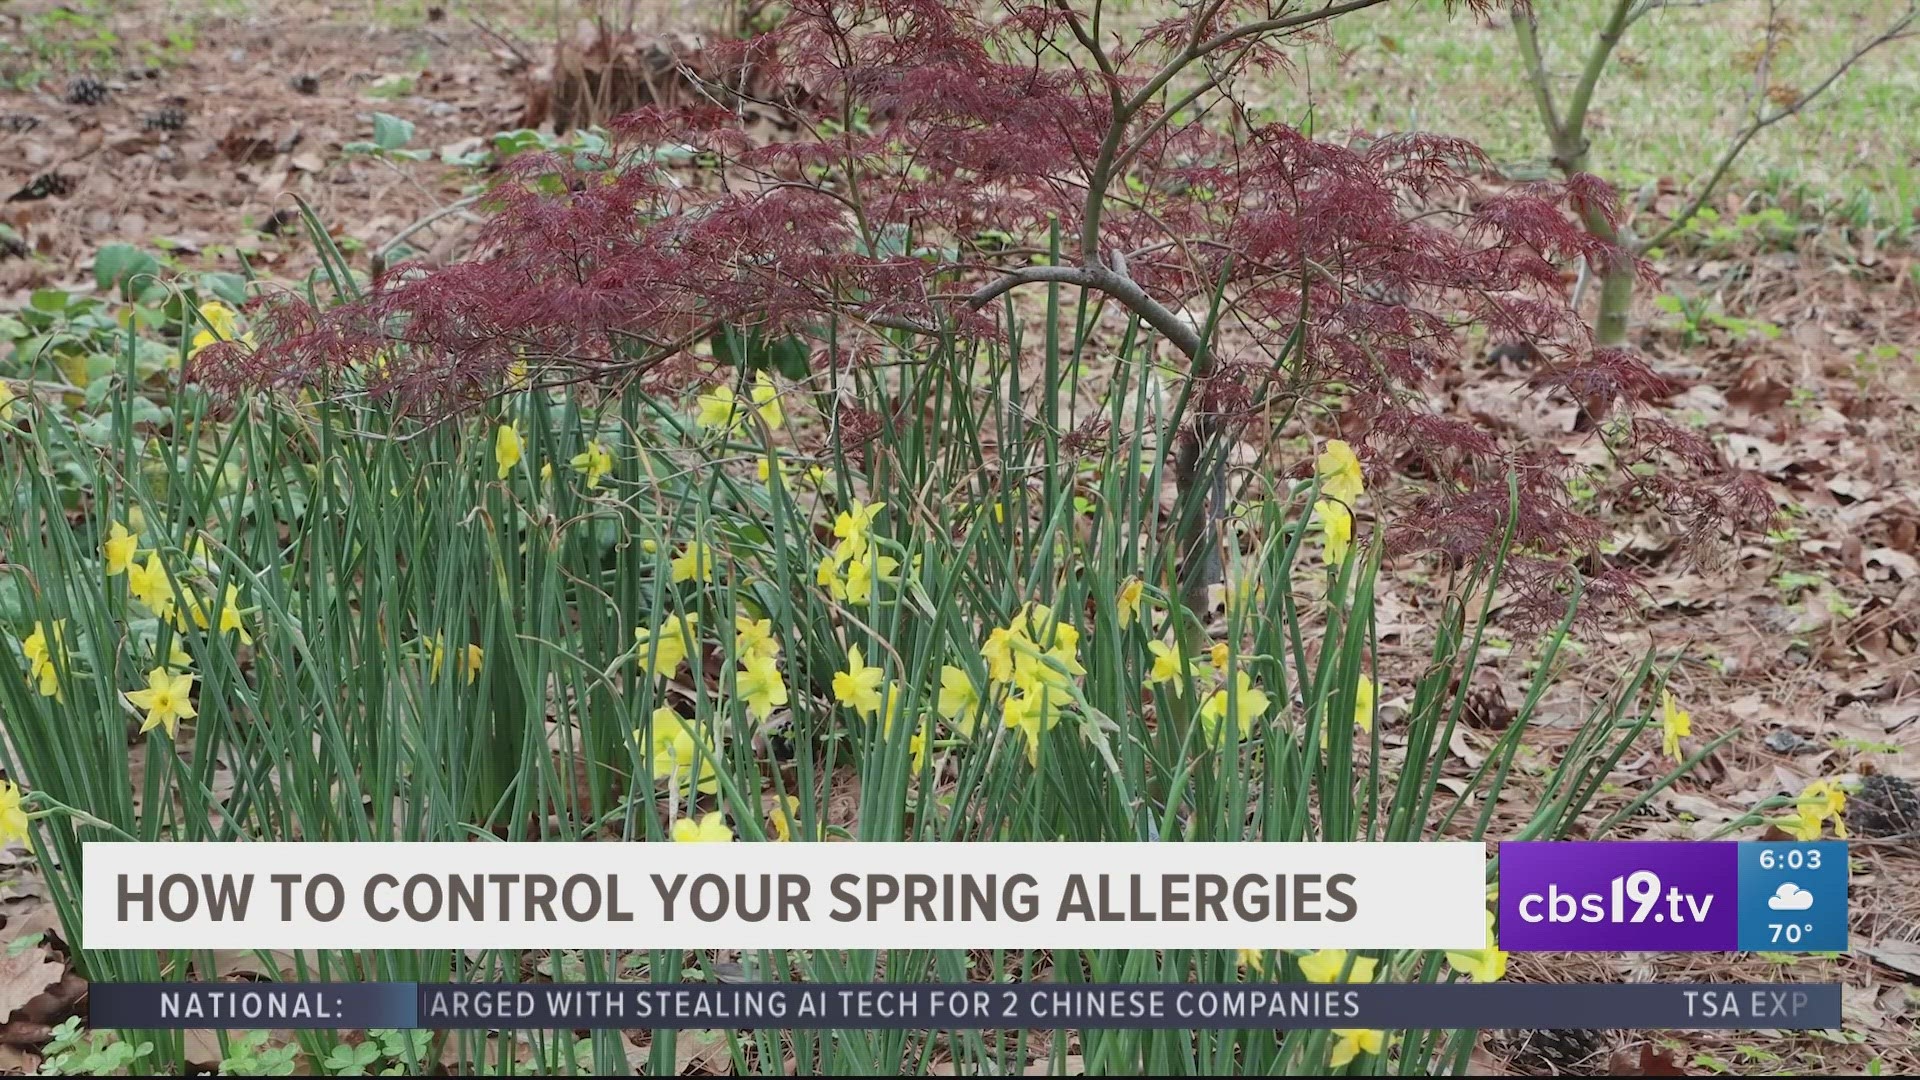 If you’re someone who struggles with allergies, you’re probably already feeling the effects. Doctors say wearing a mask outdoors could help.